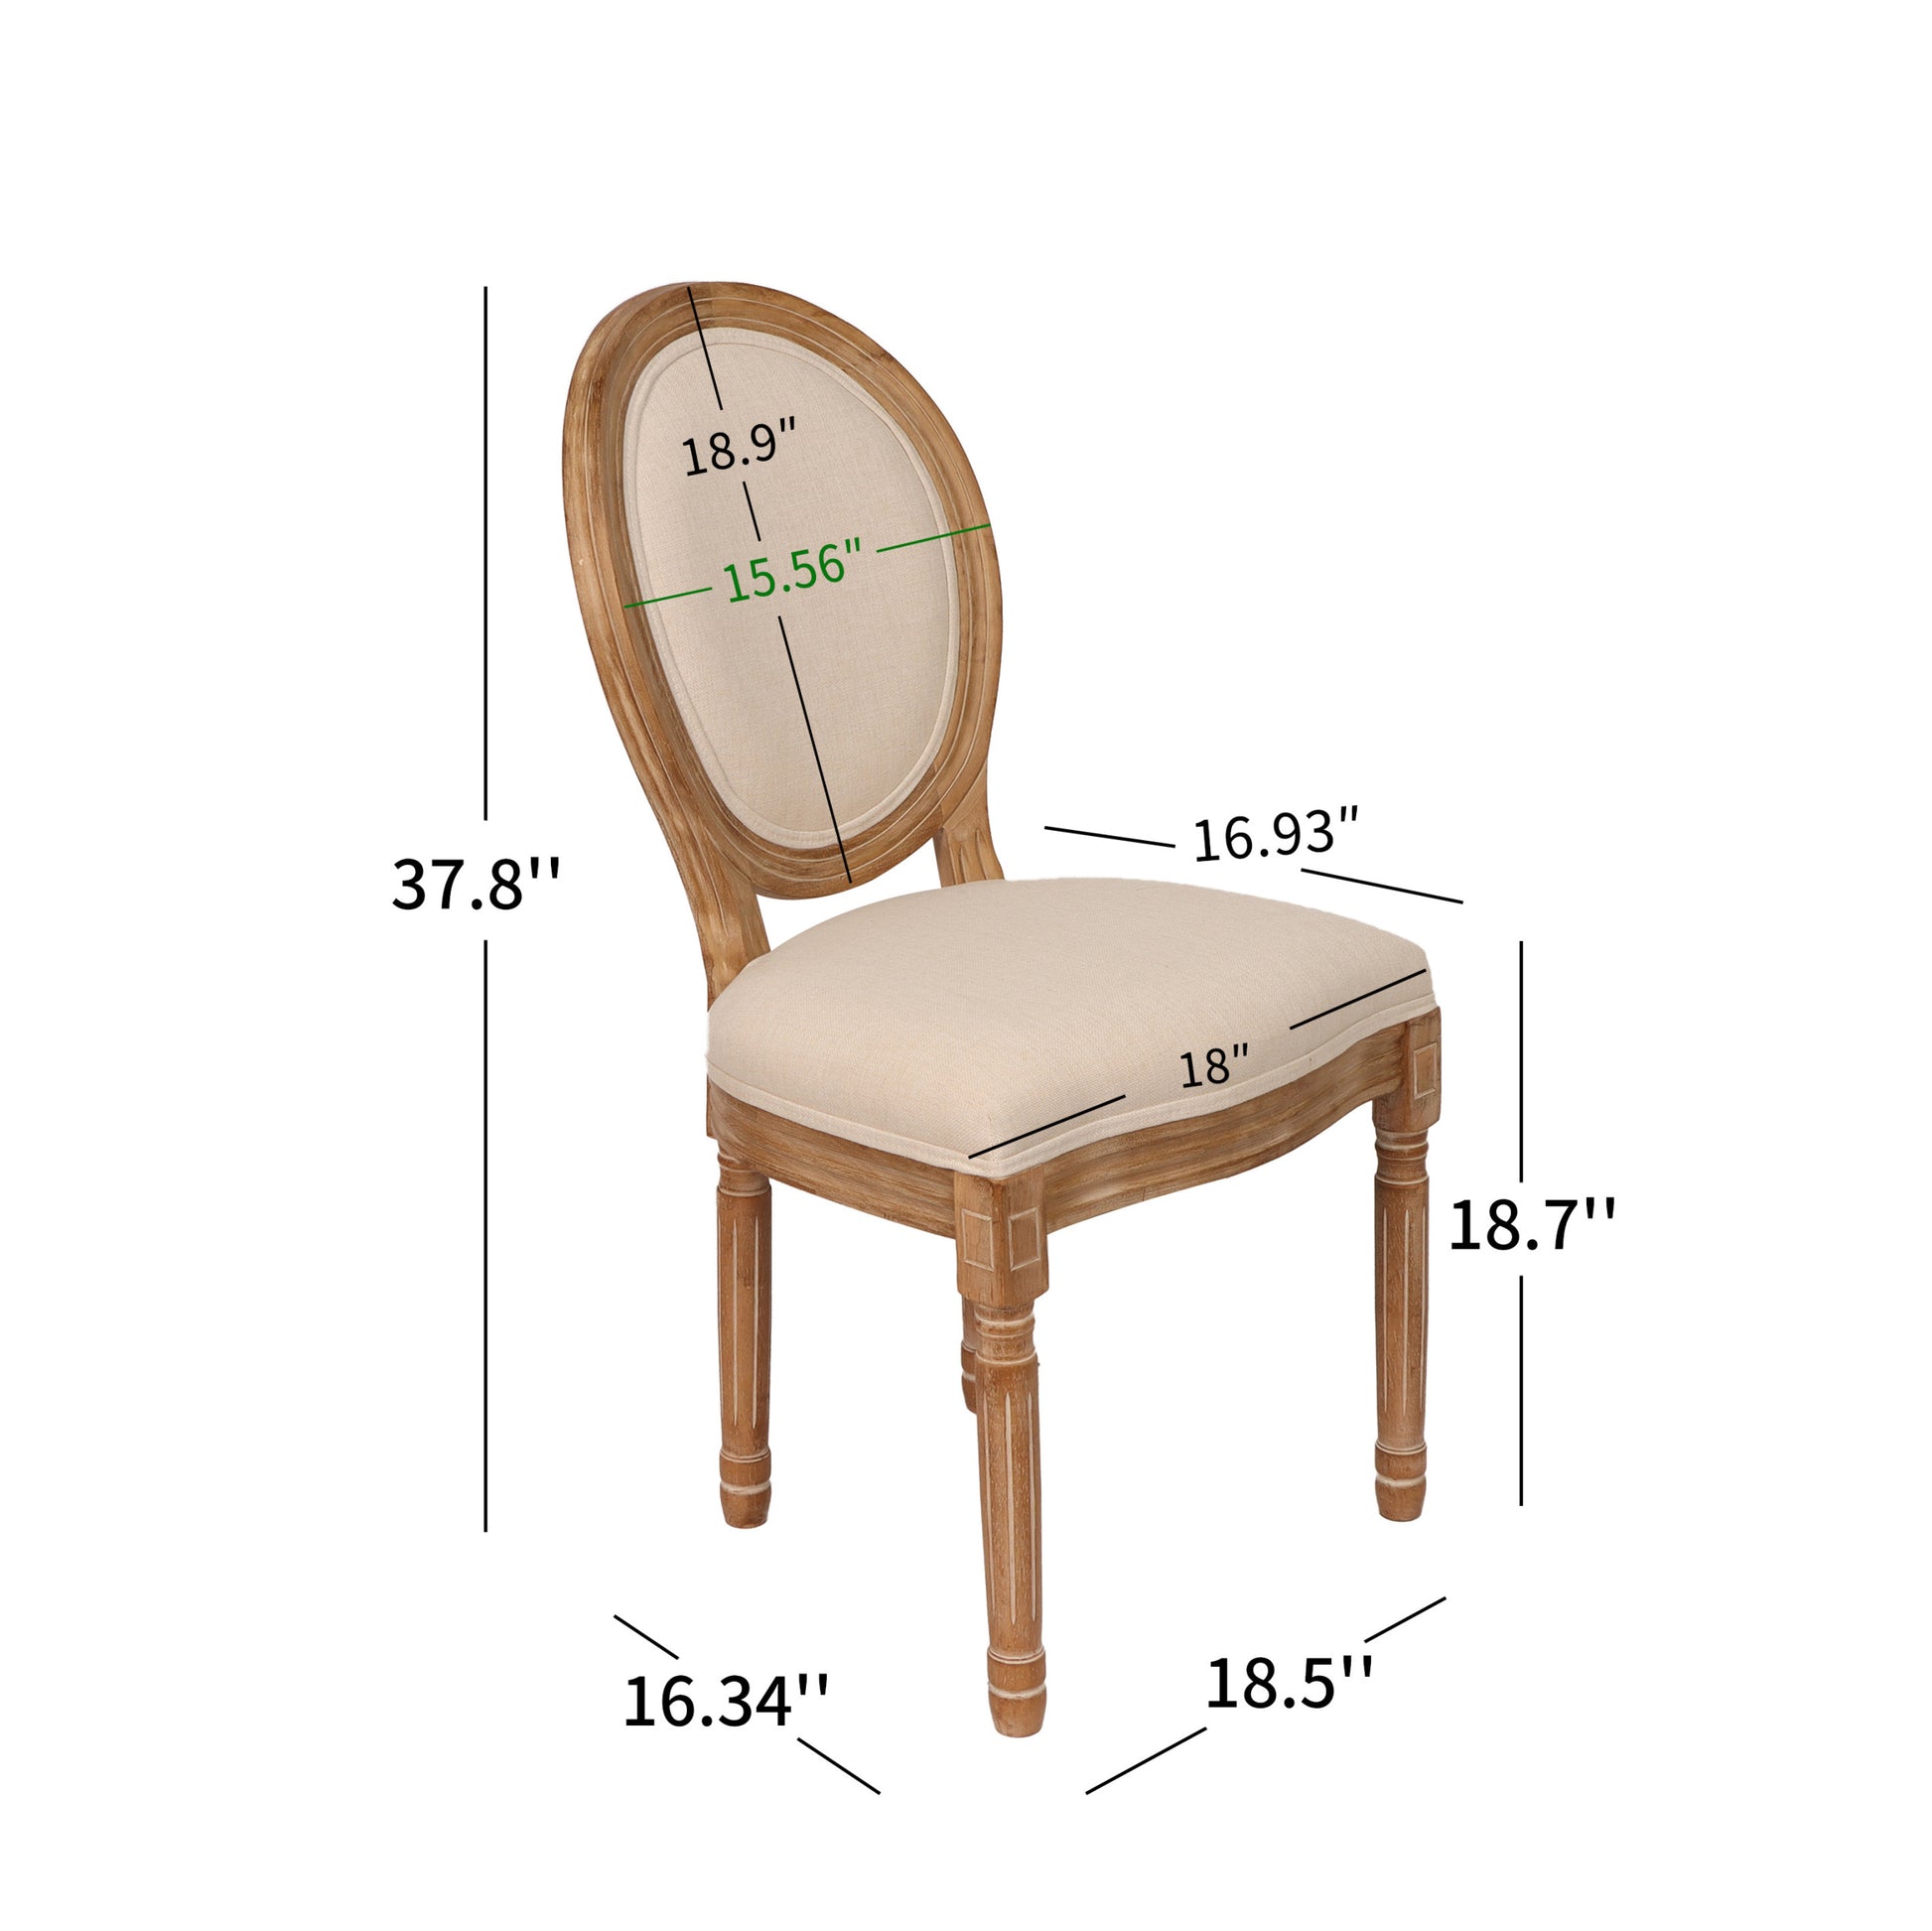 French Country Dining Chairs With Round Back Set